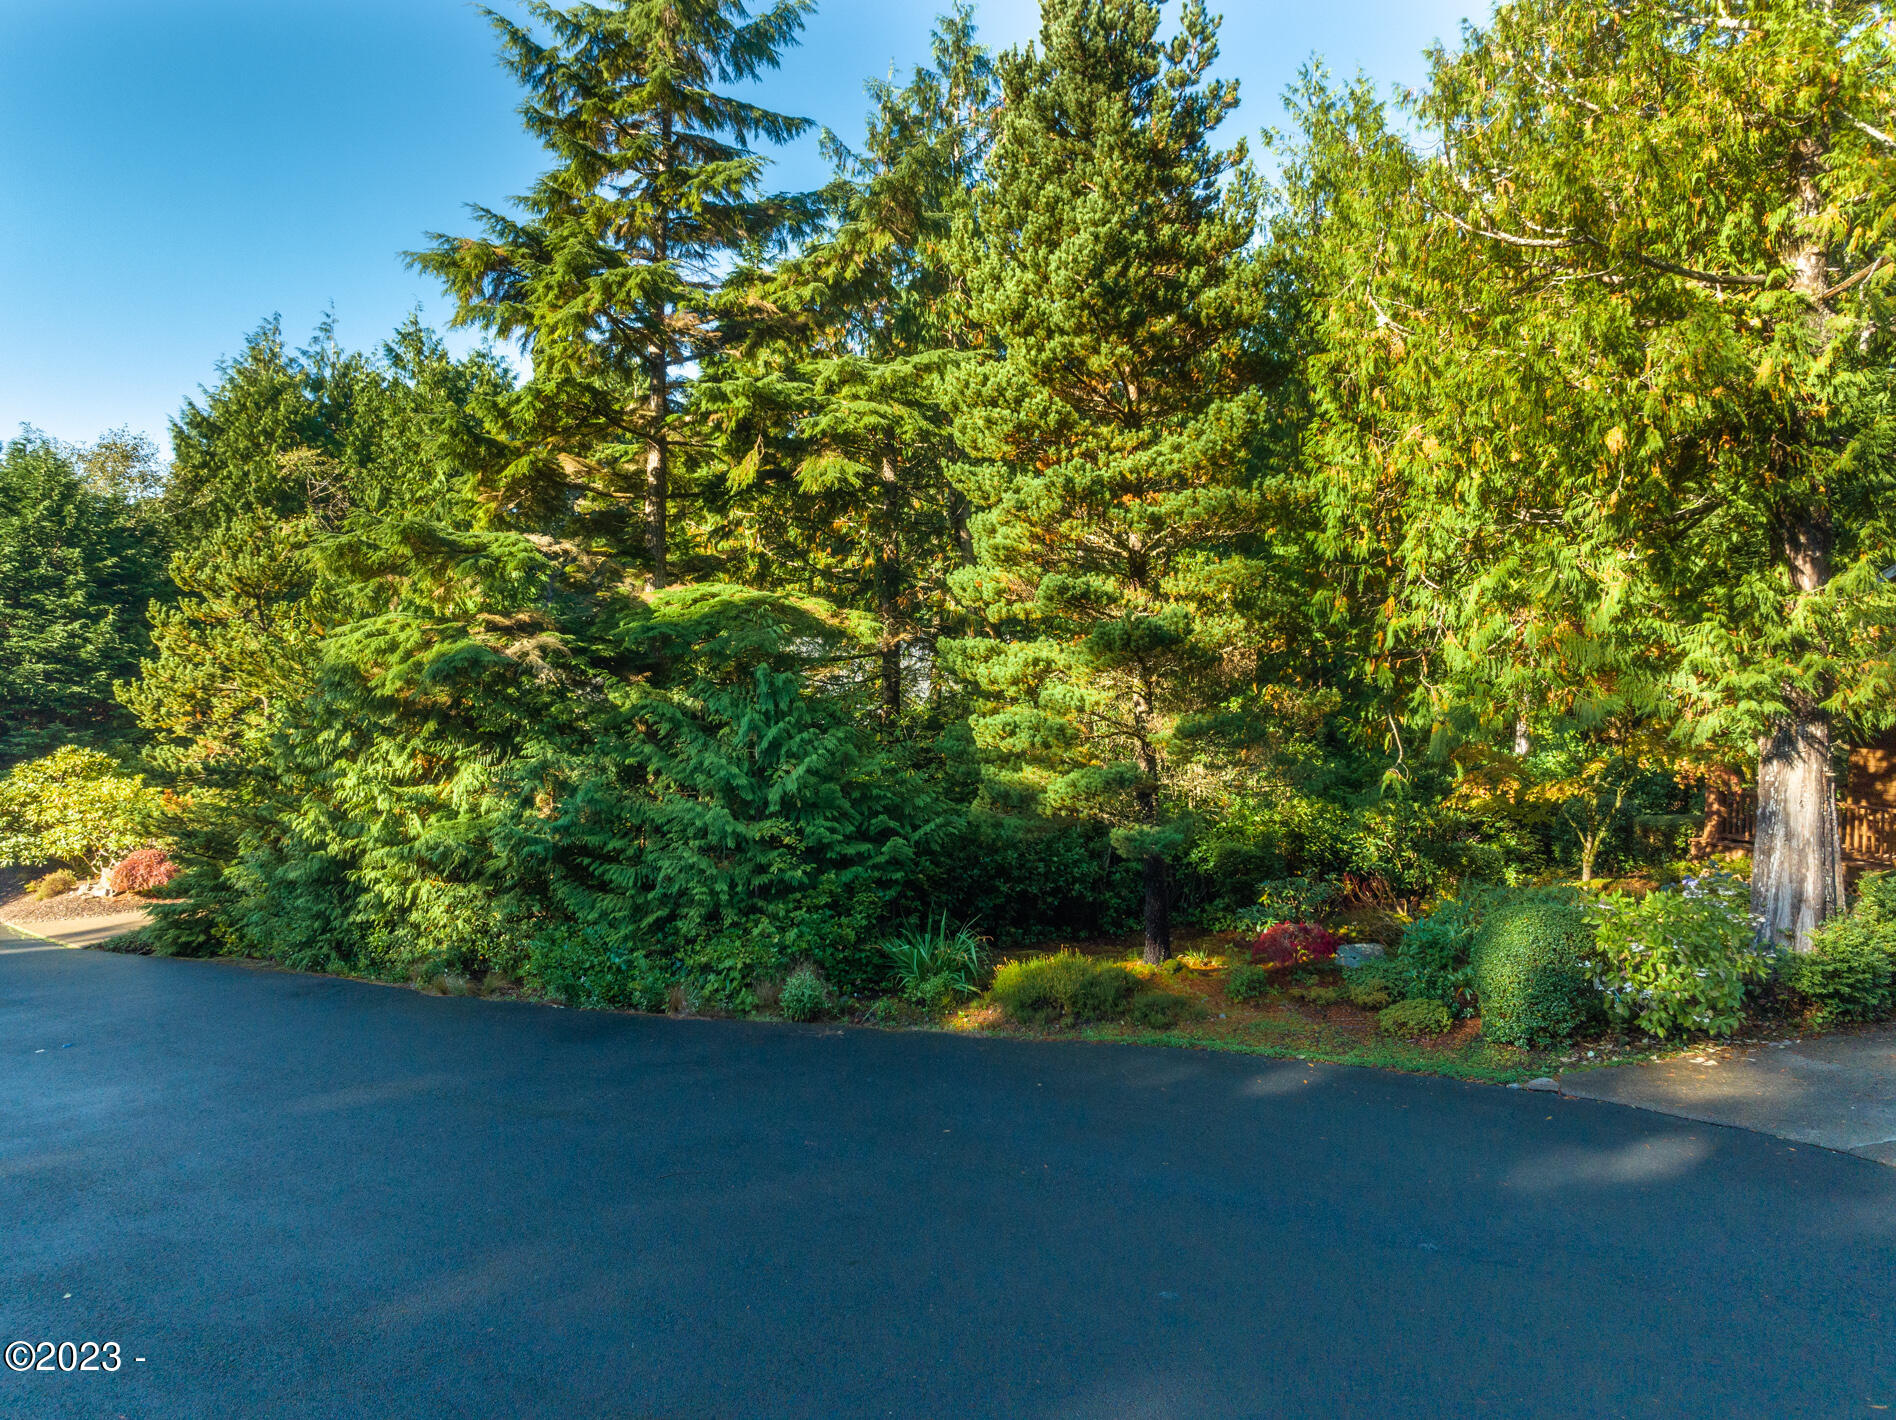 Lot 184 Gull Station Depoe Bay, Gleneden Beach, Lincoln City, Newport, Otis, Rose Lodge, Seal Rock, Waldport, Yachats, To Home Listings - Amy Plechaty, Emerald Coast Realty Real Estate, homes for sale, property for sale